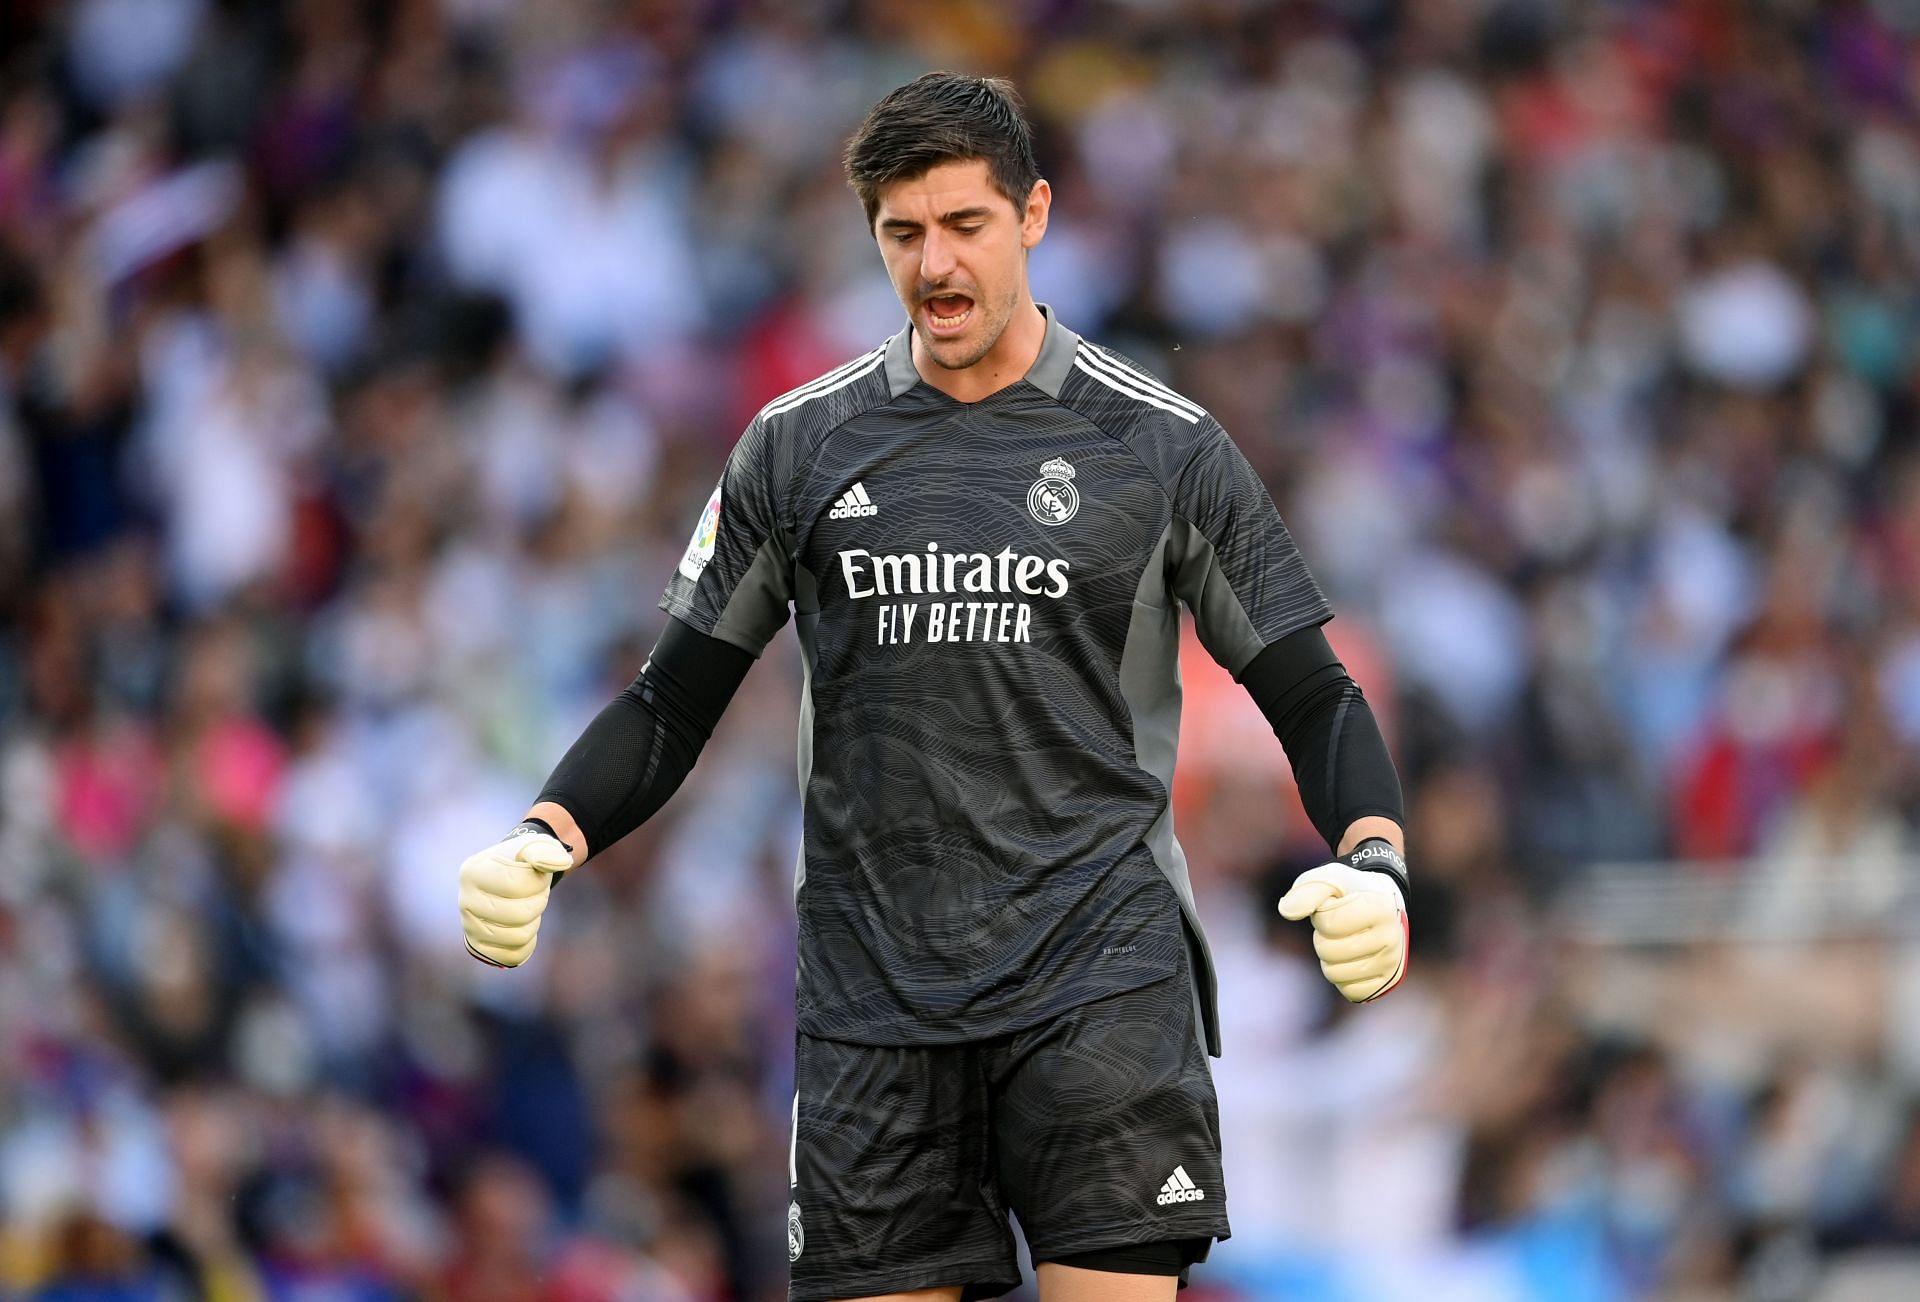 Thibaut Courtois will have a crucial role to play against PSG